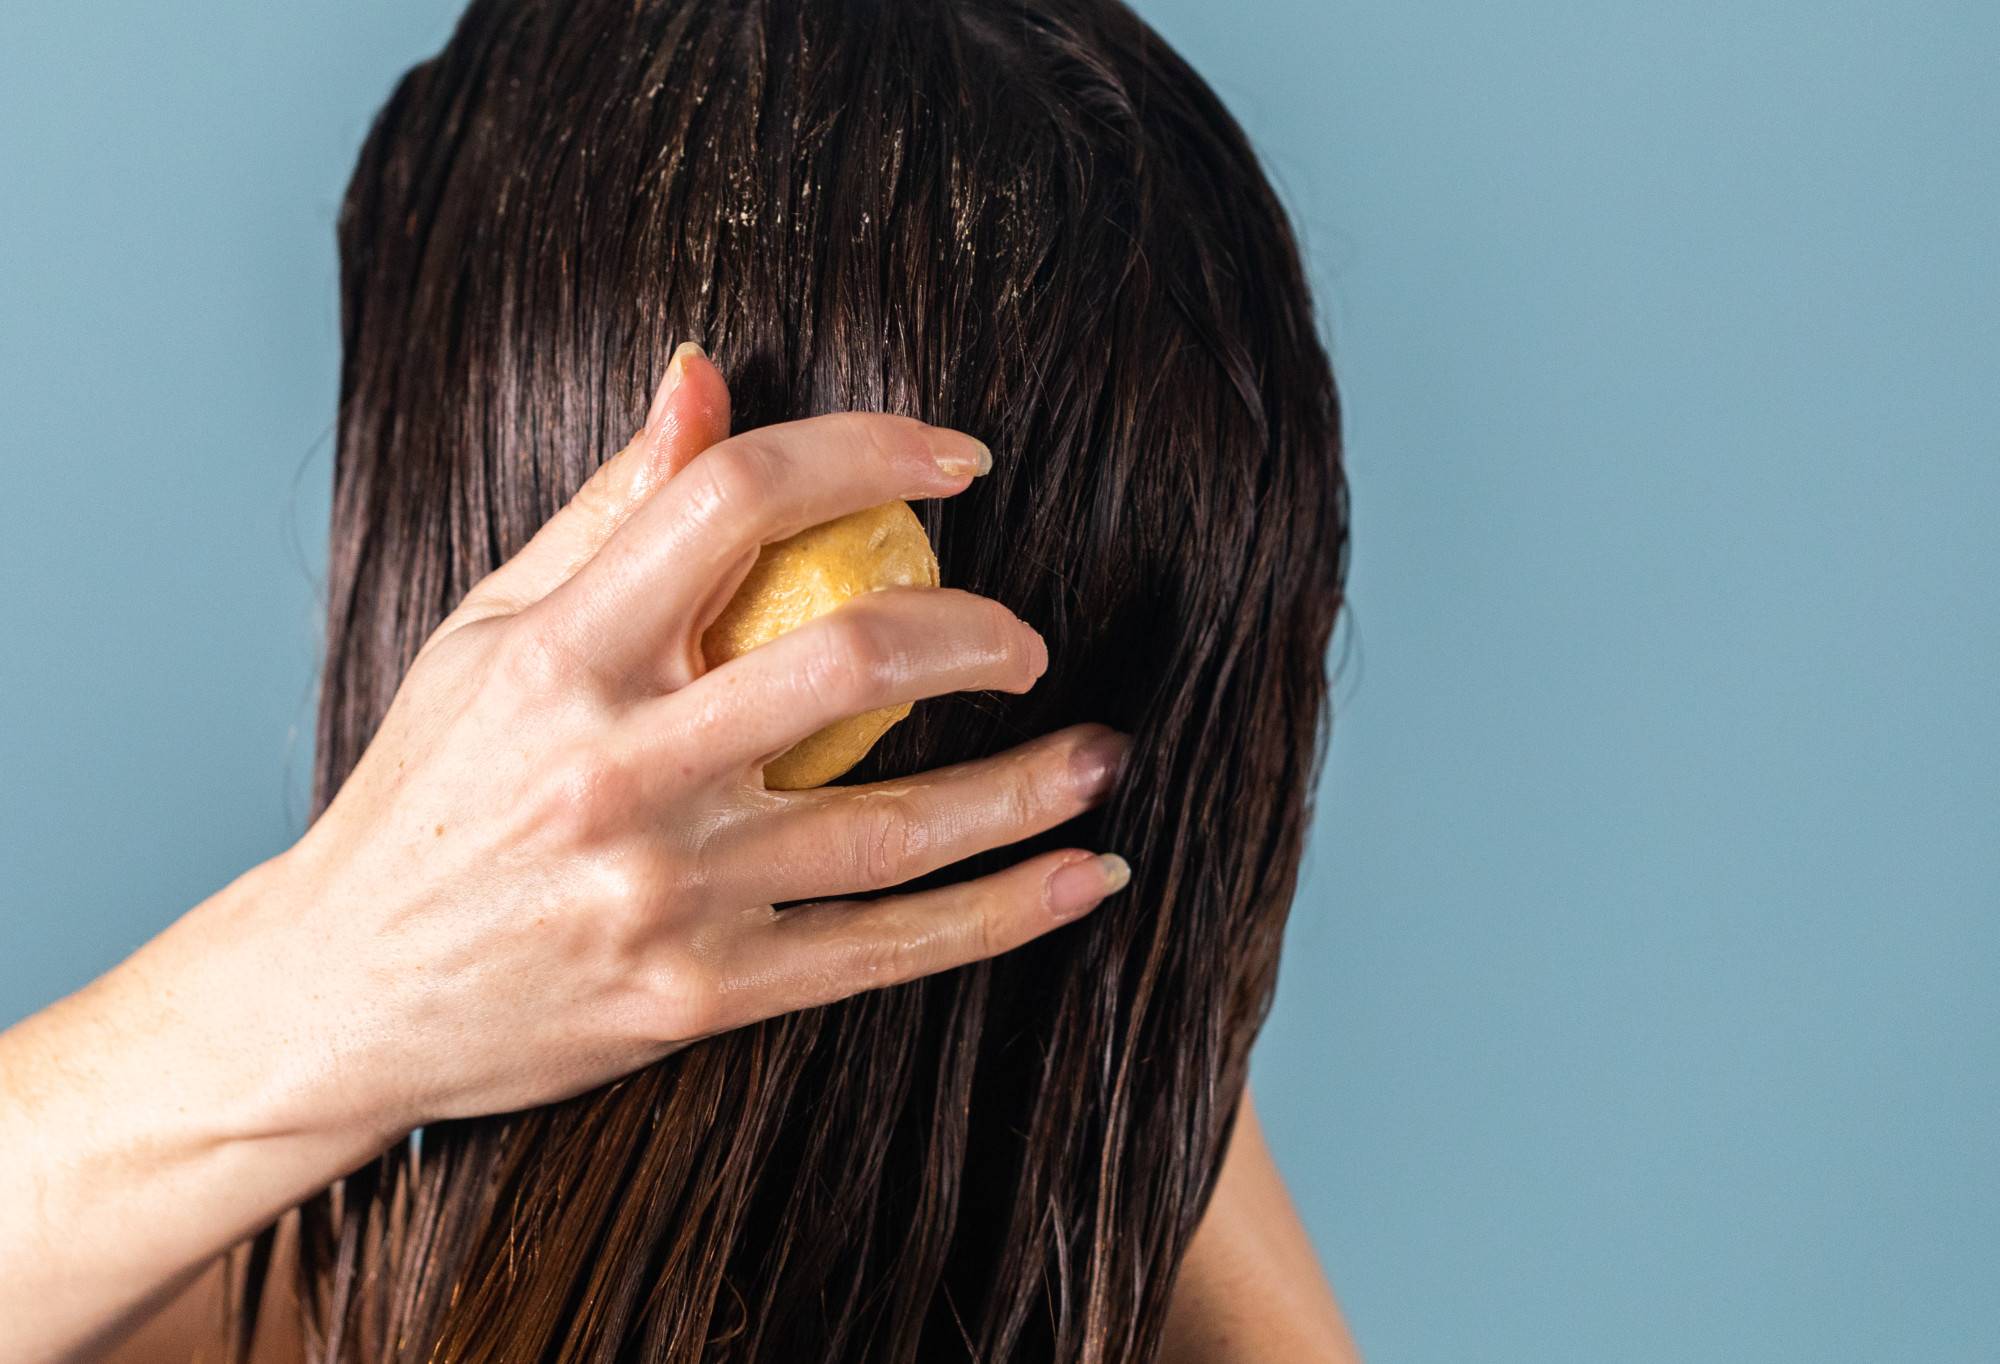 A person with long, brown hair rubs The Golden Cap, a yellow, oval shaped solid conditioner bar, through their hair.